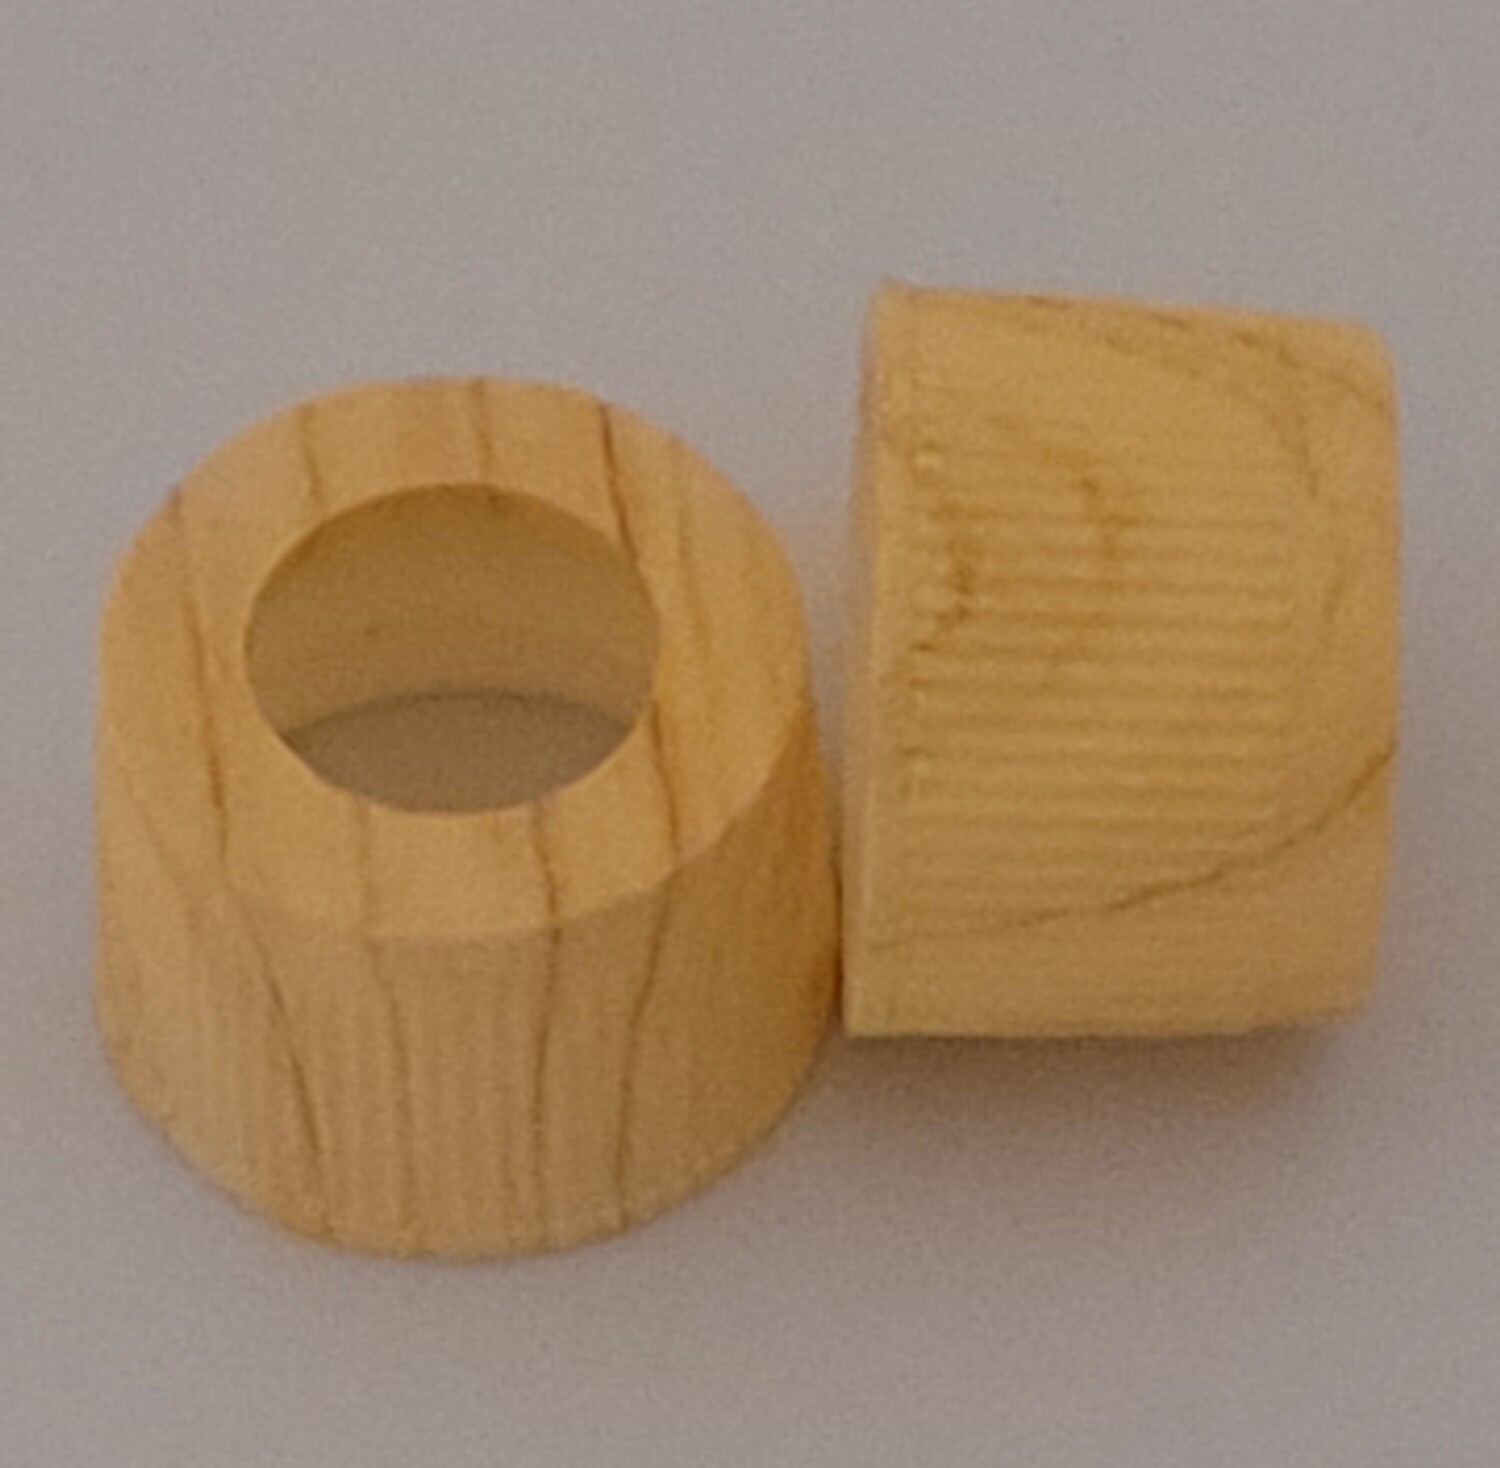 18mm Timber Imitation with Ridged Sides Dropper Cap -Pack of 100